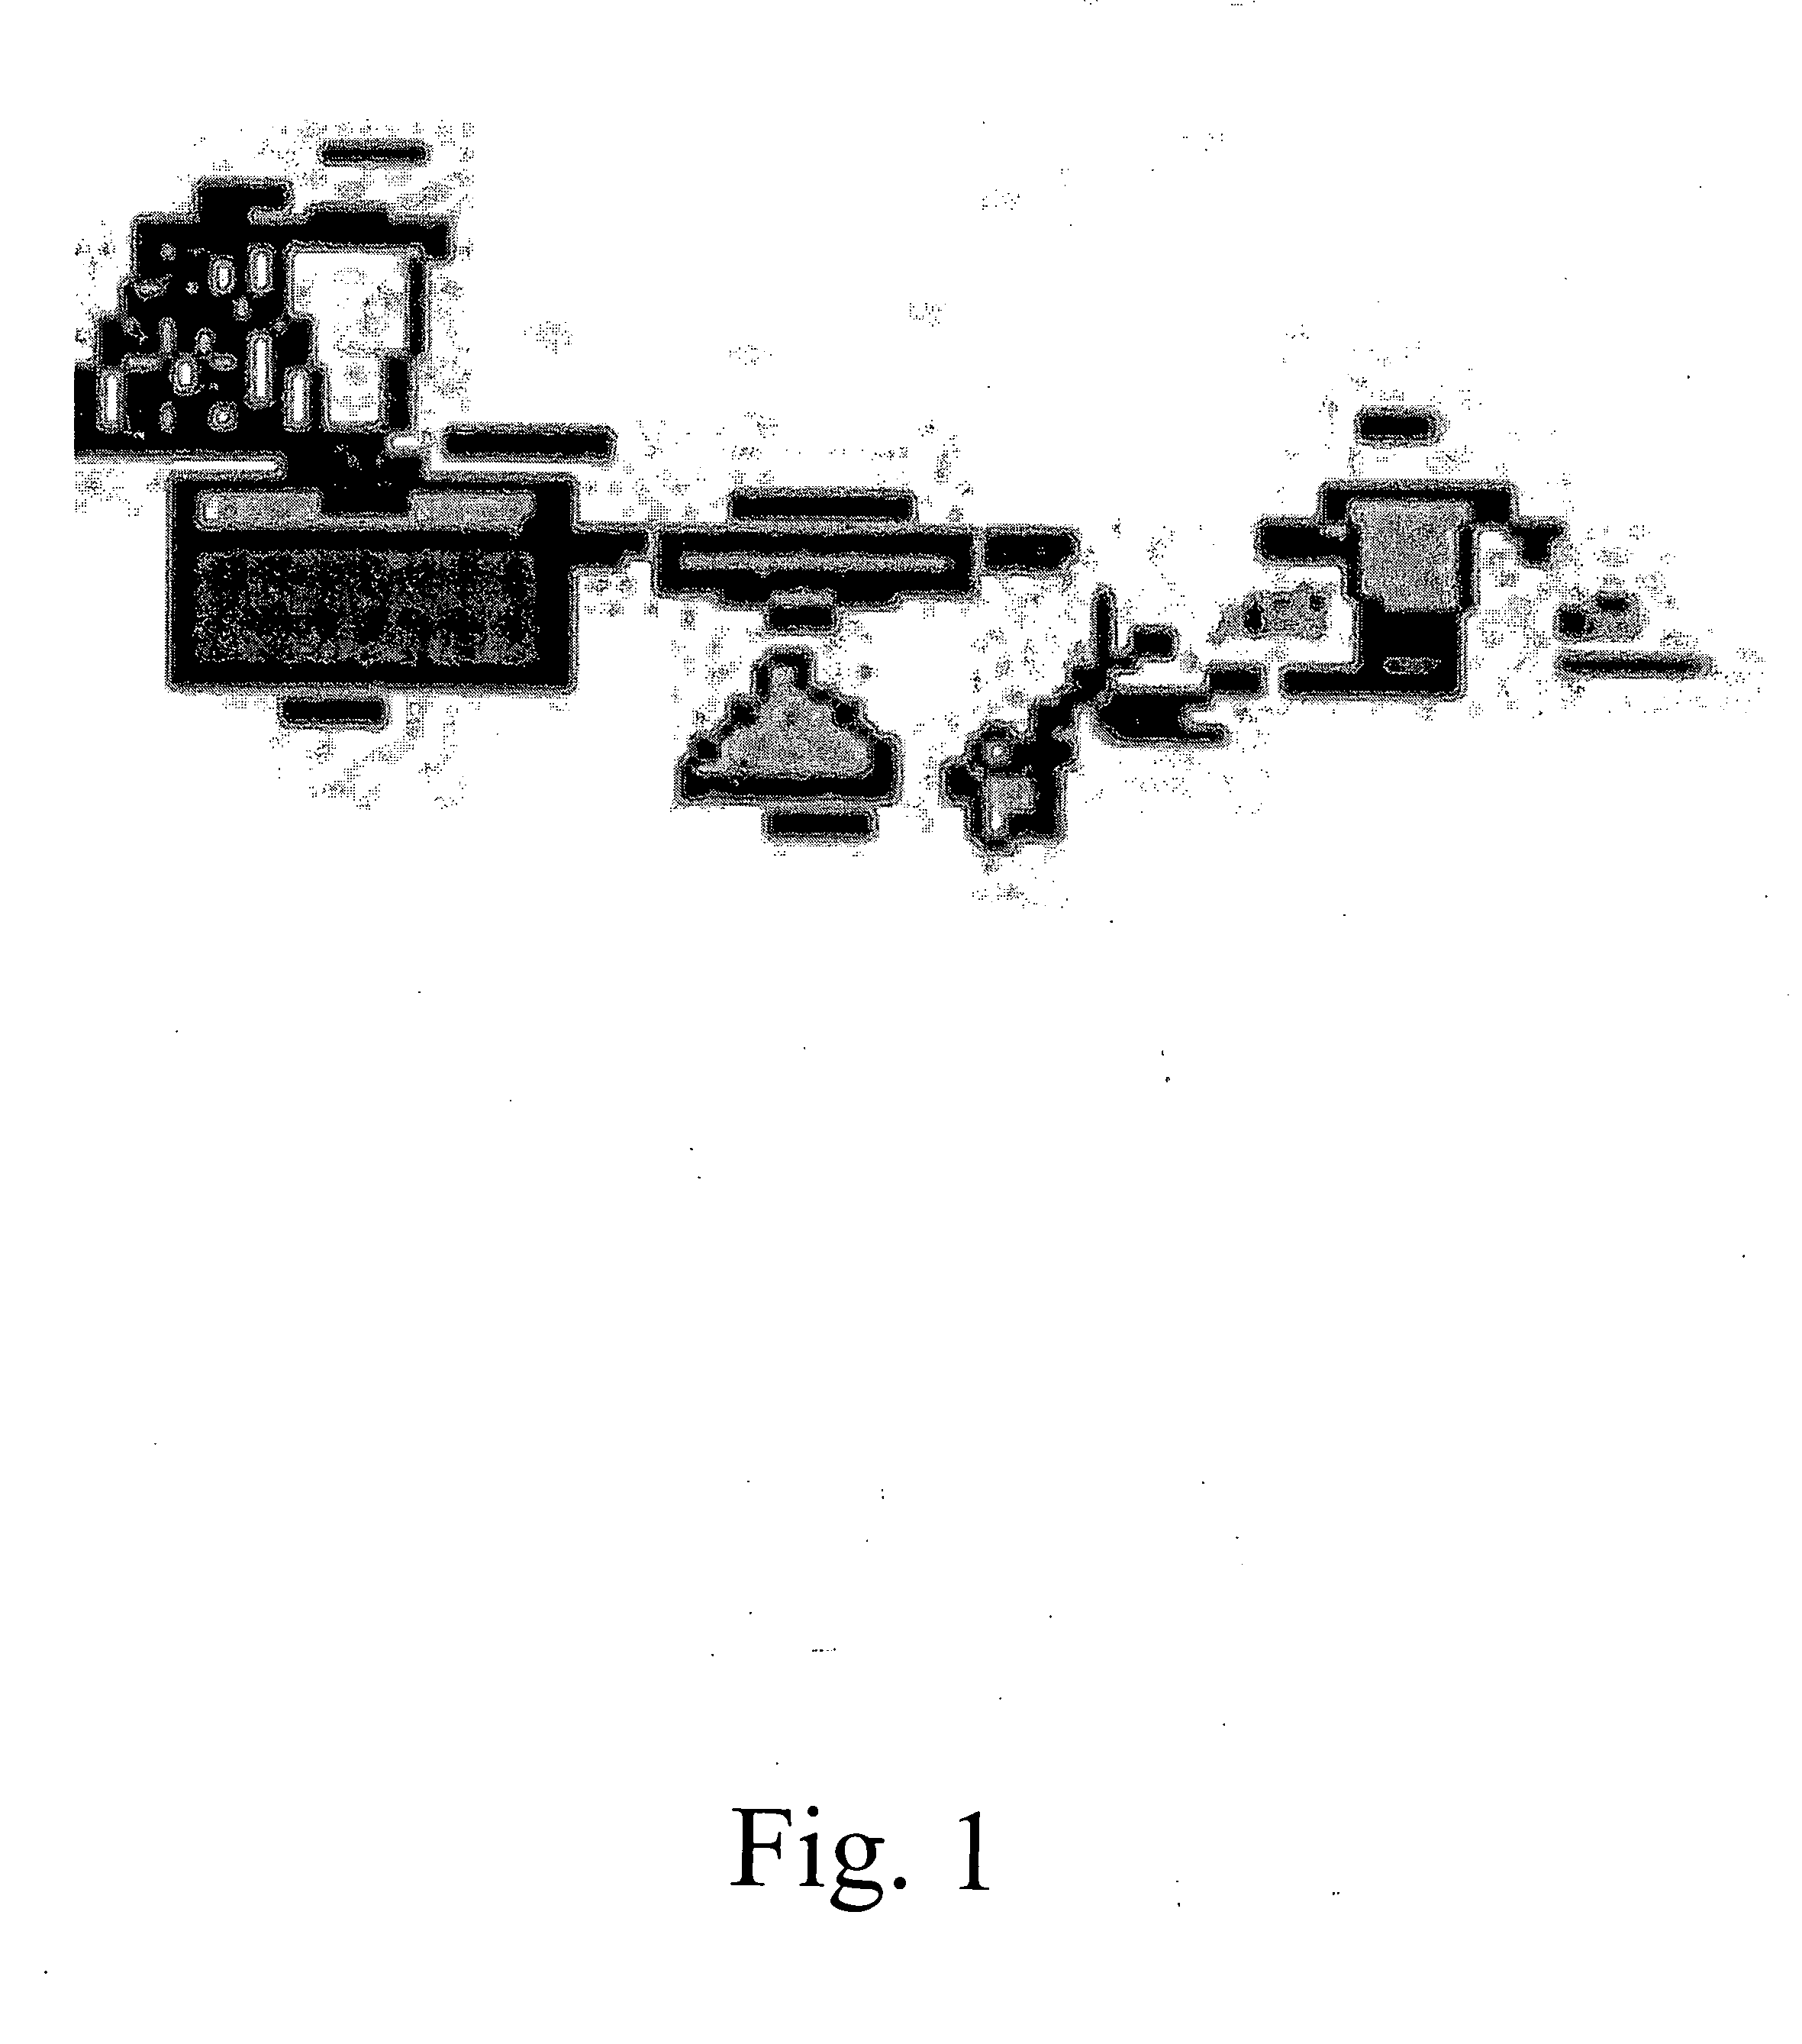 Process for recovering rubber from rubber-bearing plants with a gristmill